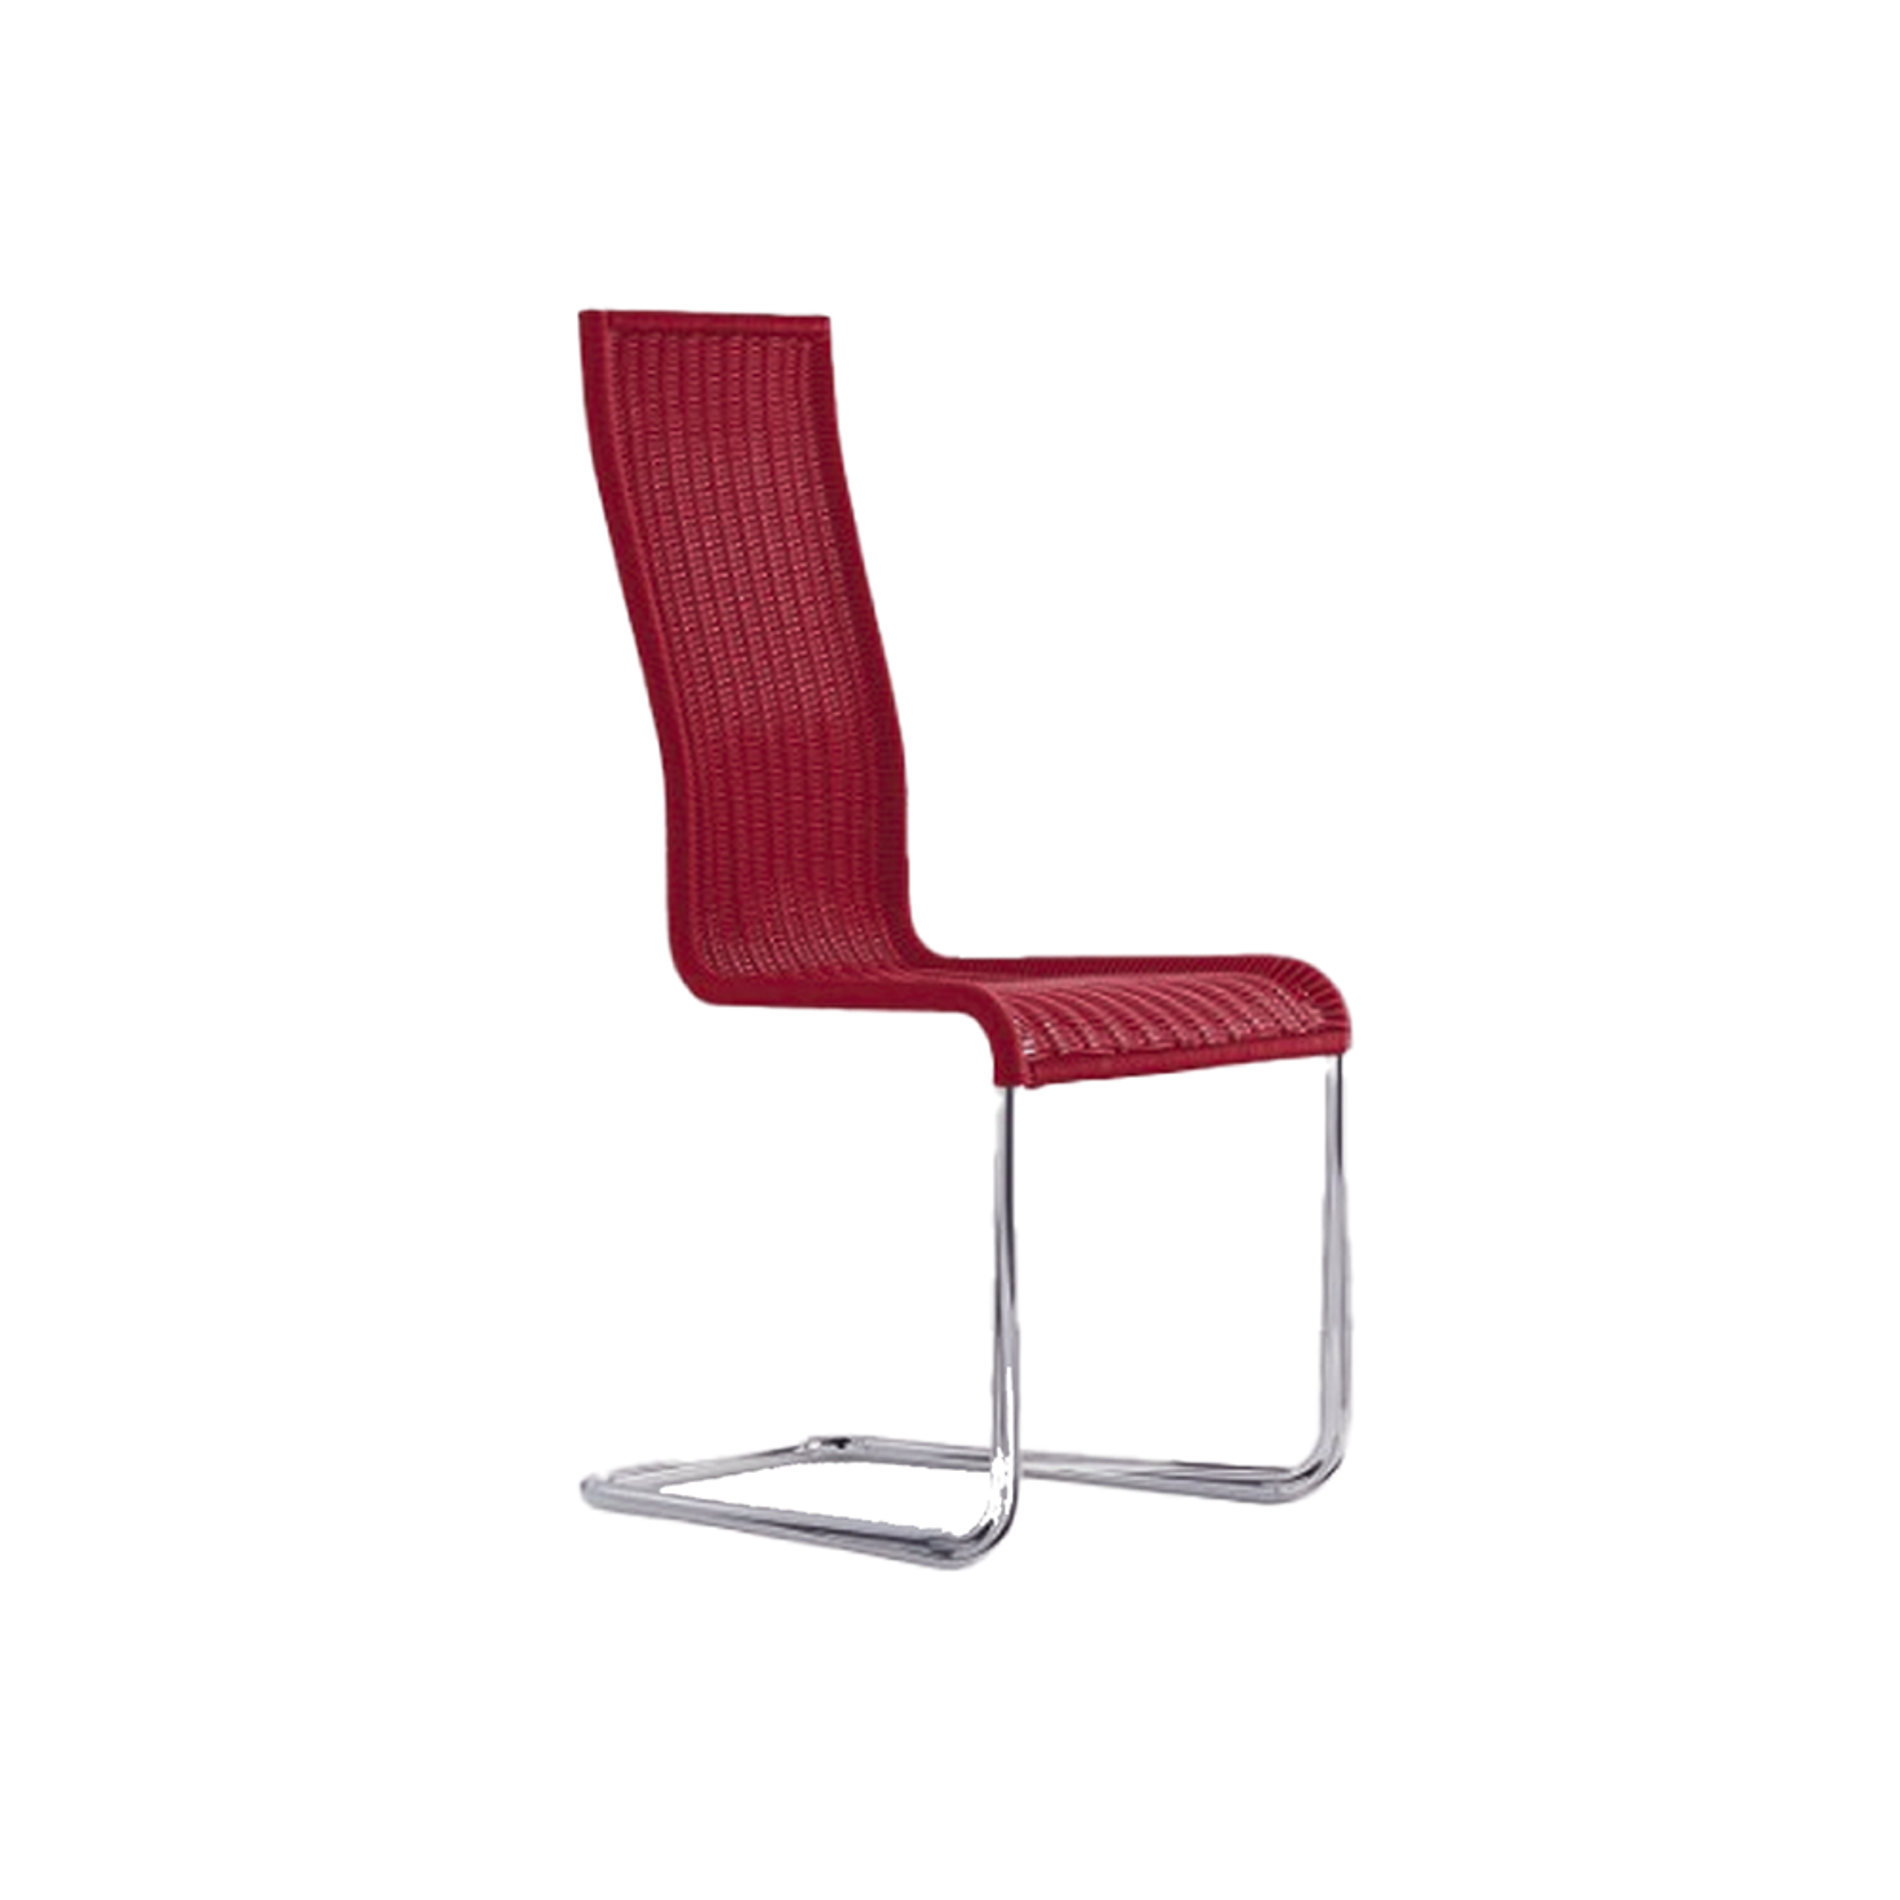 TECTA [Outlet|DP] B25I Chair - Red